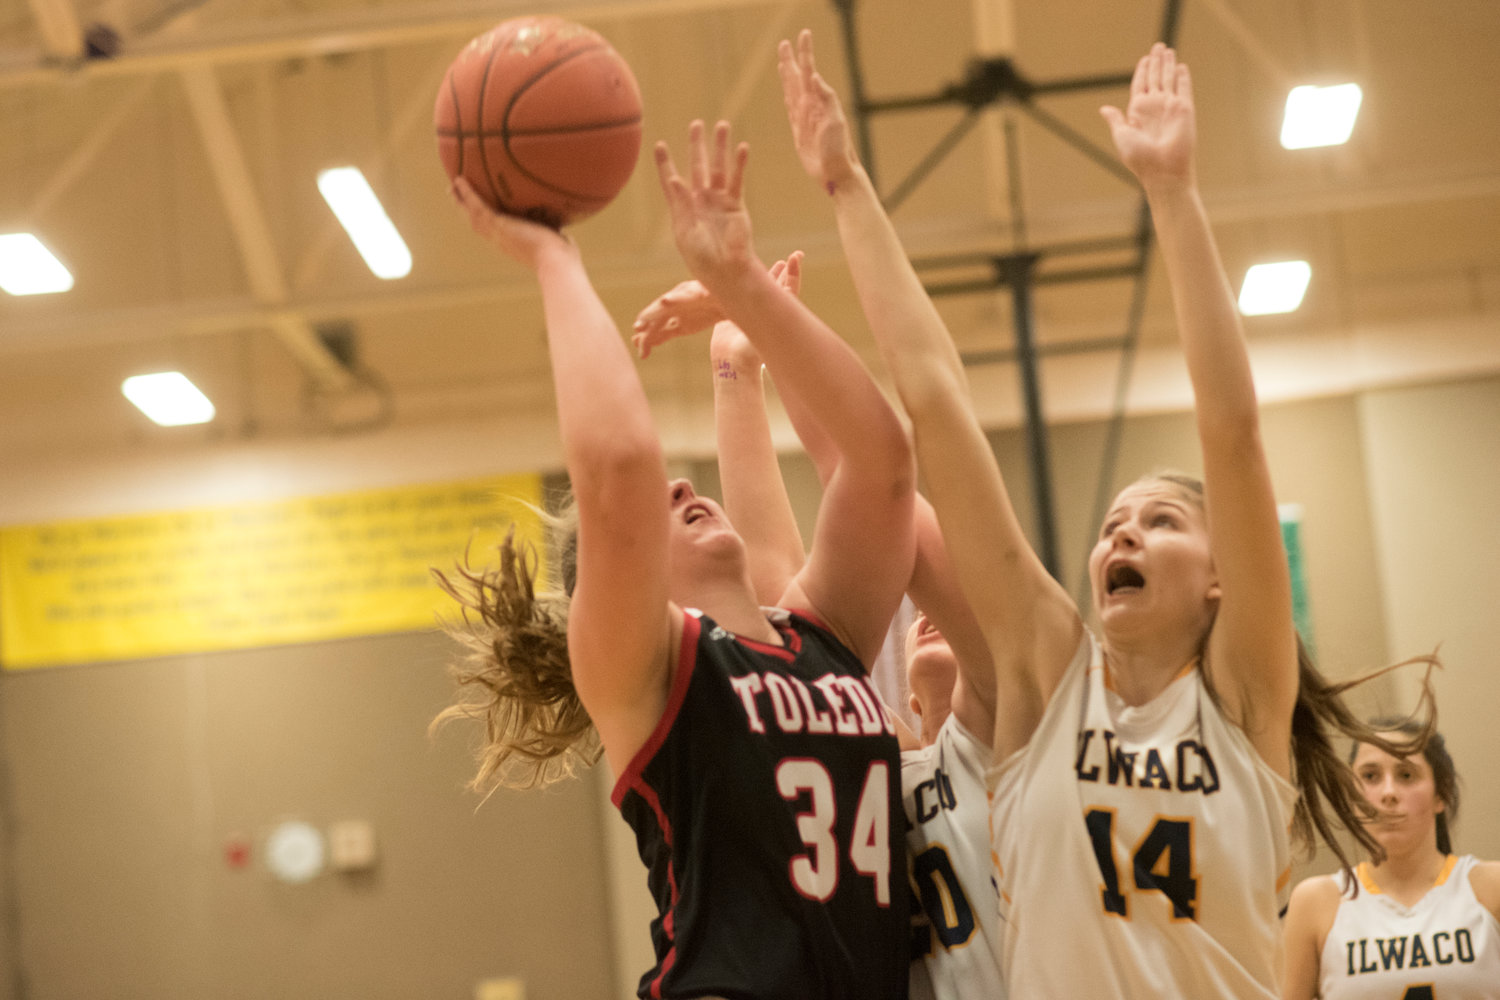 Toledo's Stacie Spahr goes up for two points in the paint against Ilwaco on Thursday. (Eric Trent / etrent@chronline.com)